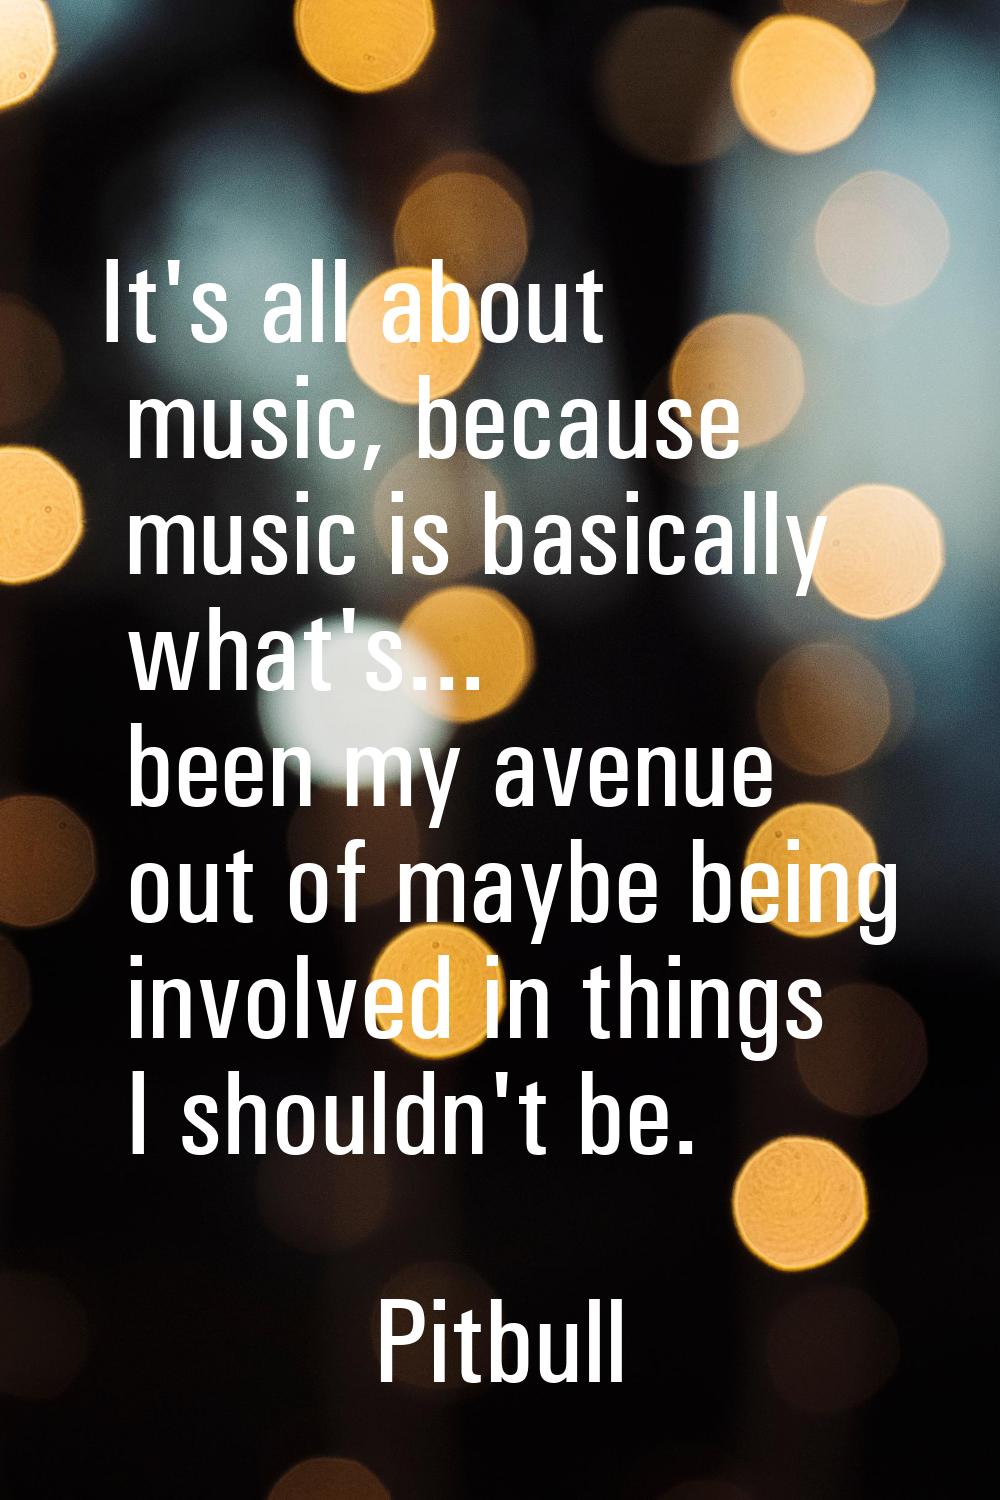 It's all about music, because music is basically what's... been my avenue out of maybe being involv